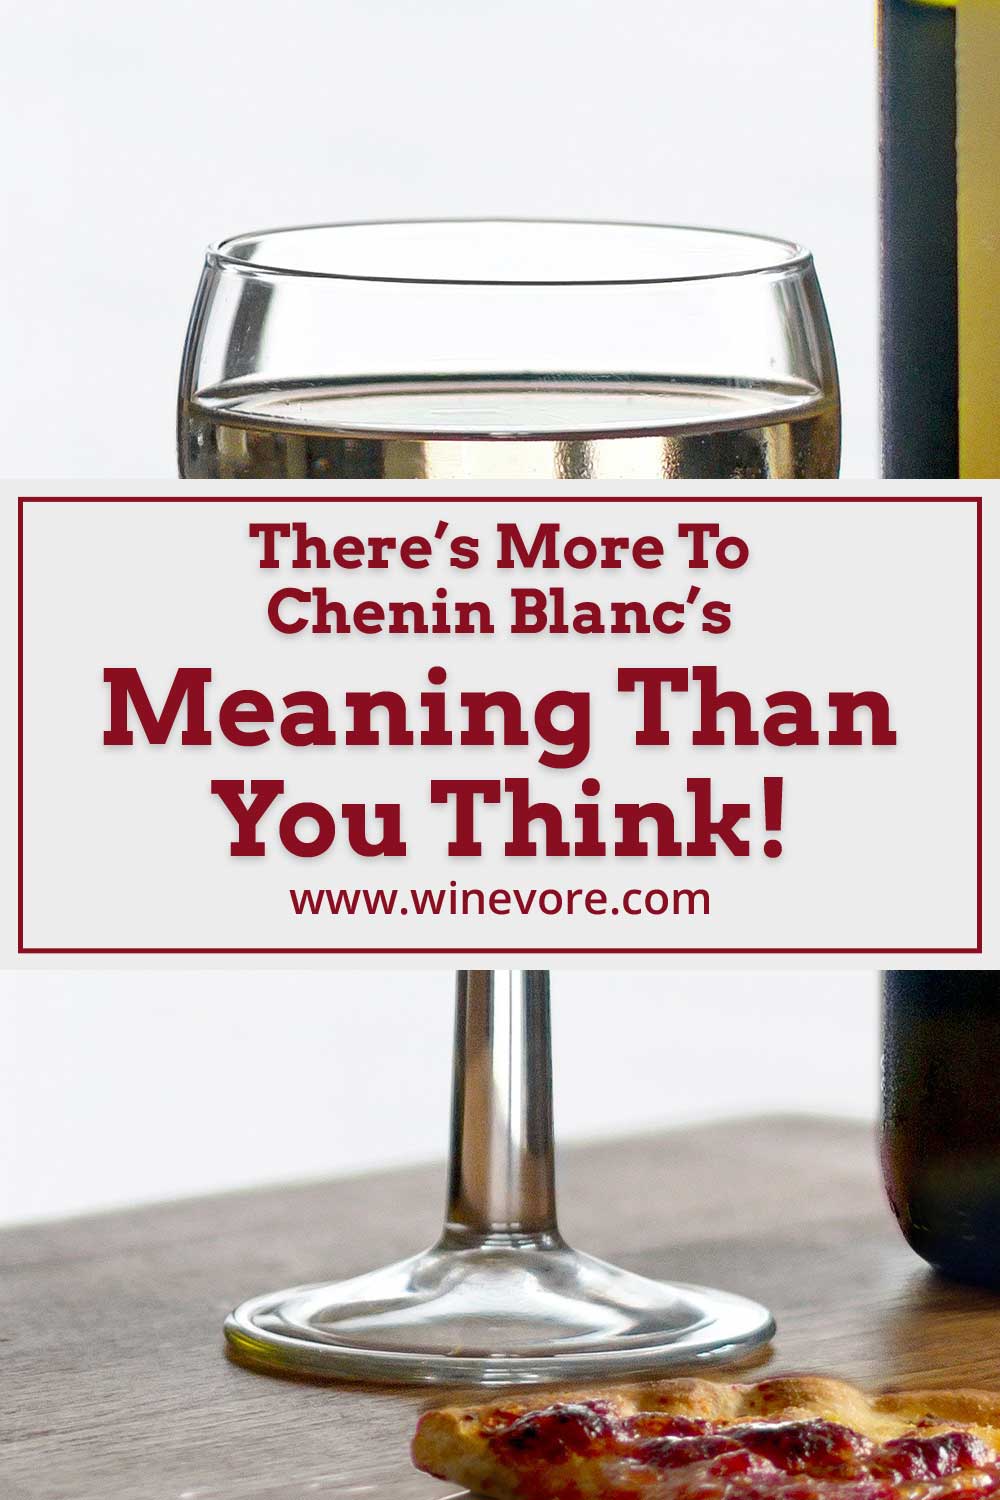 A wine glass near a slice of pizza - Chenin Blanc's Meaning.